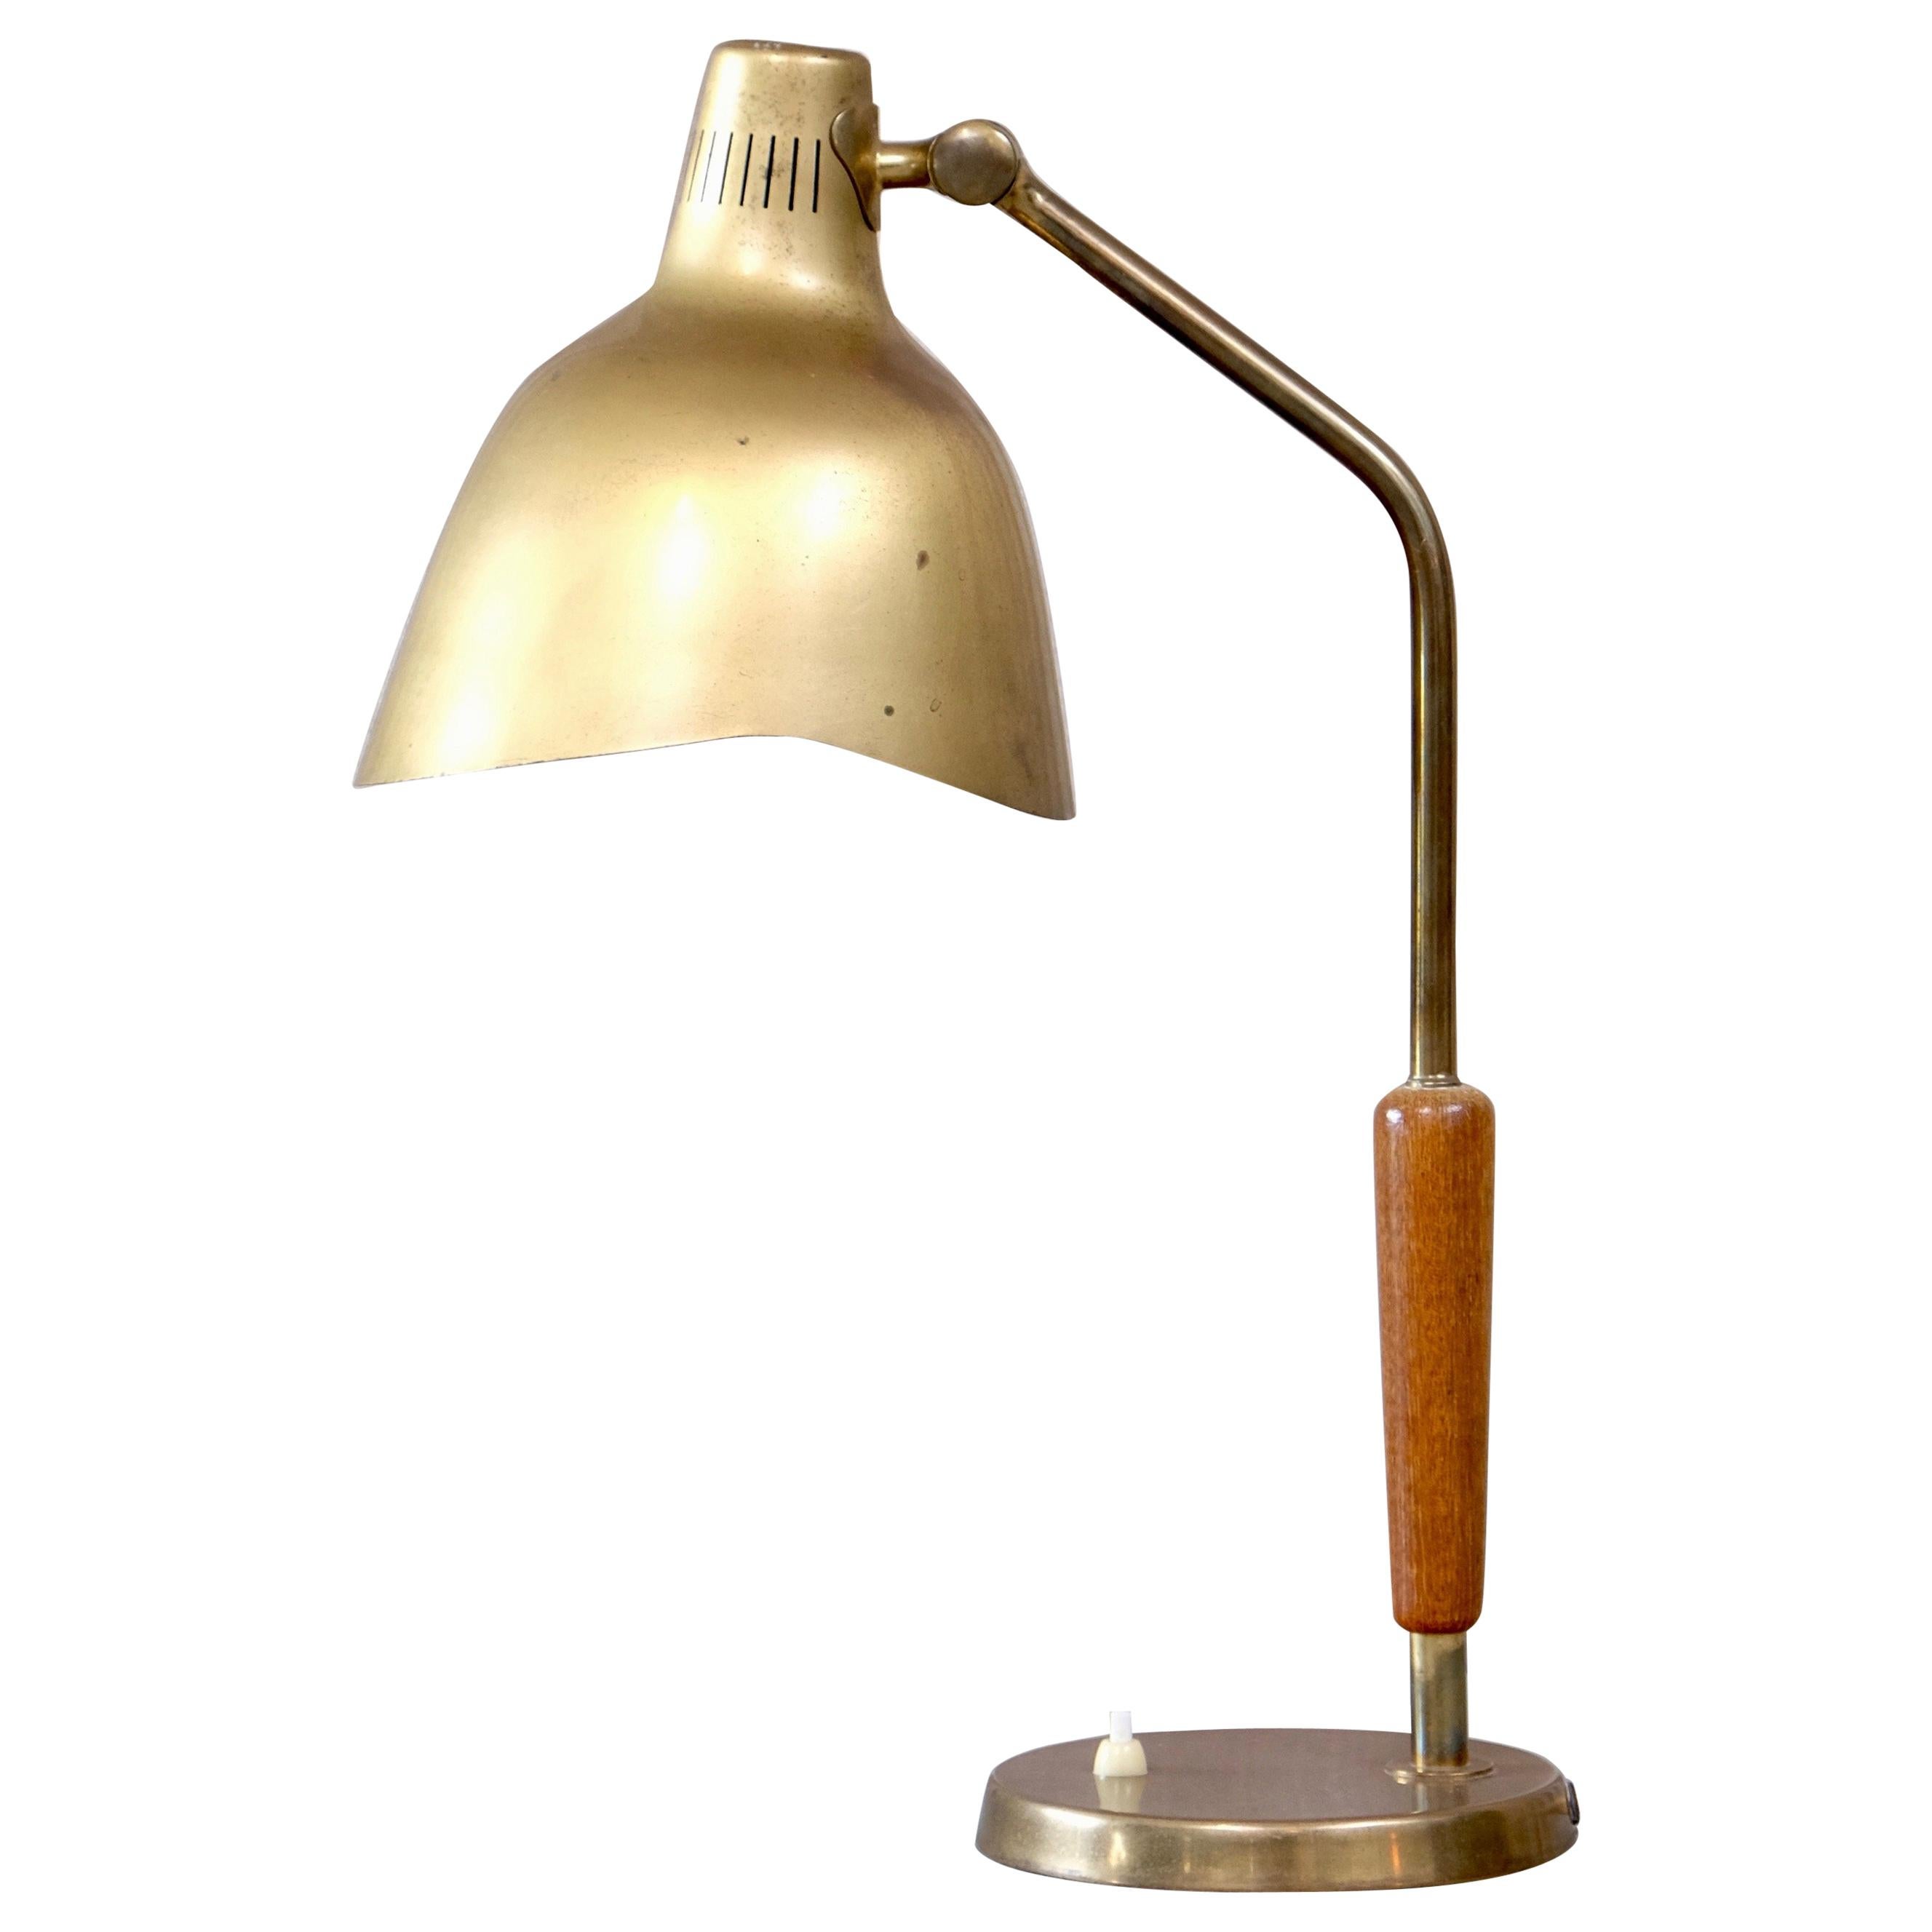 Rare Brass Table Lamp by Carl-Axel Acking, Sweden, 1950s